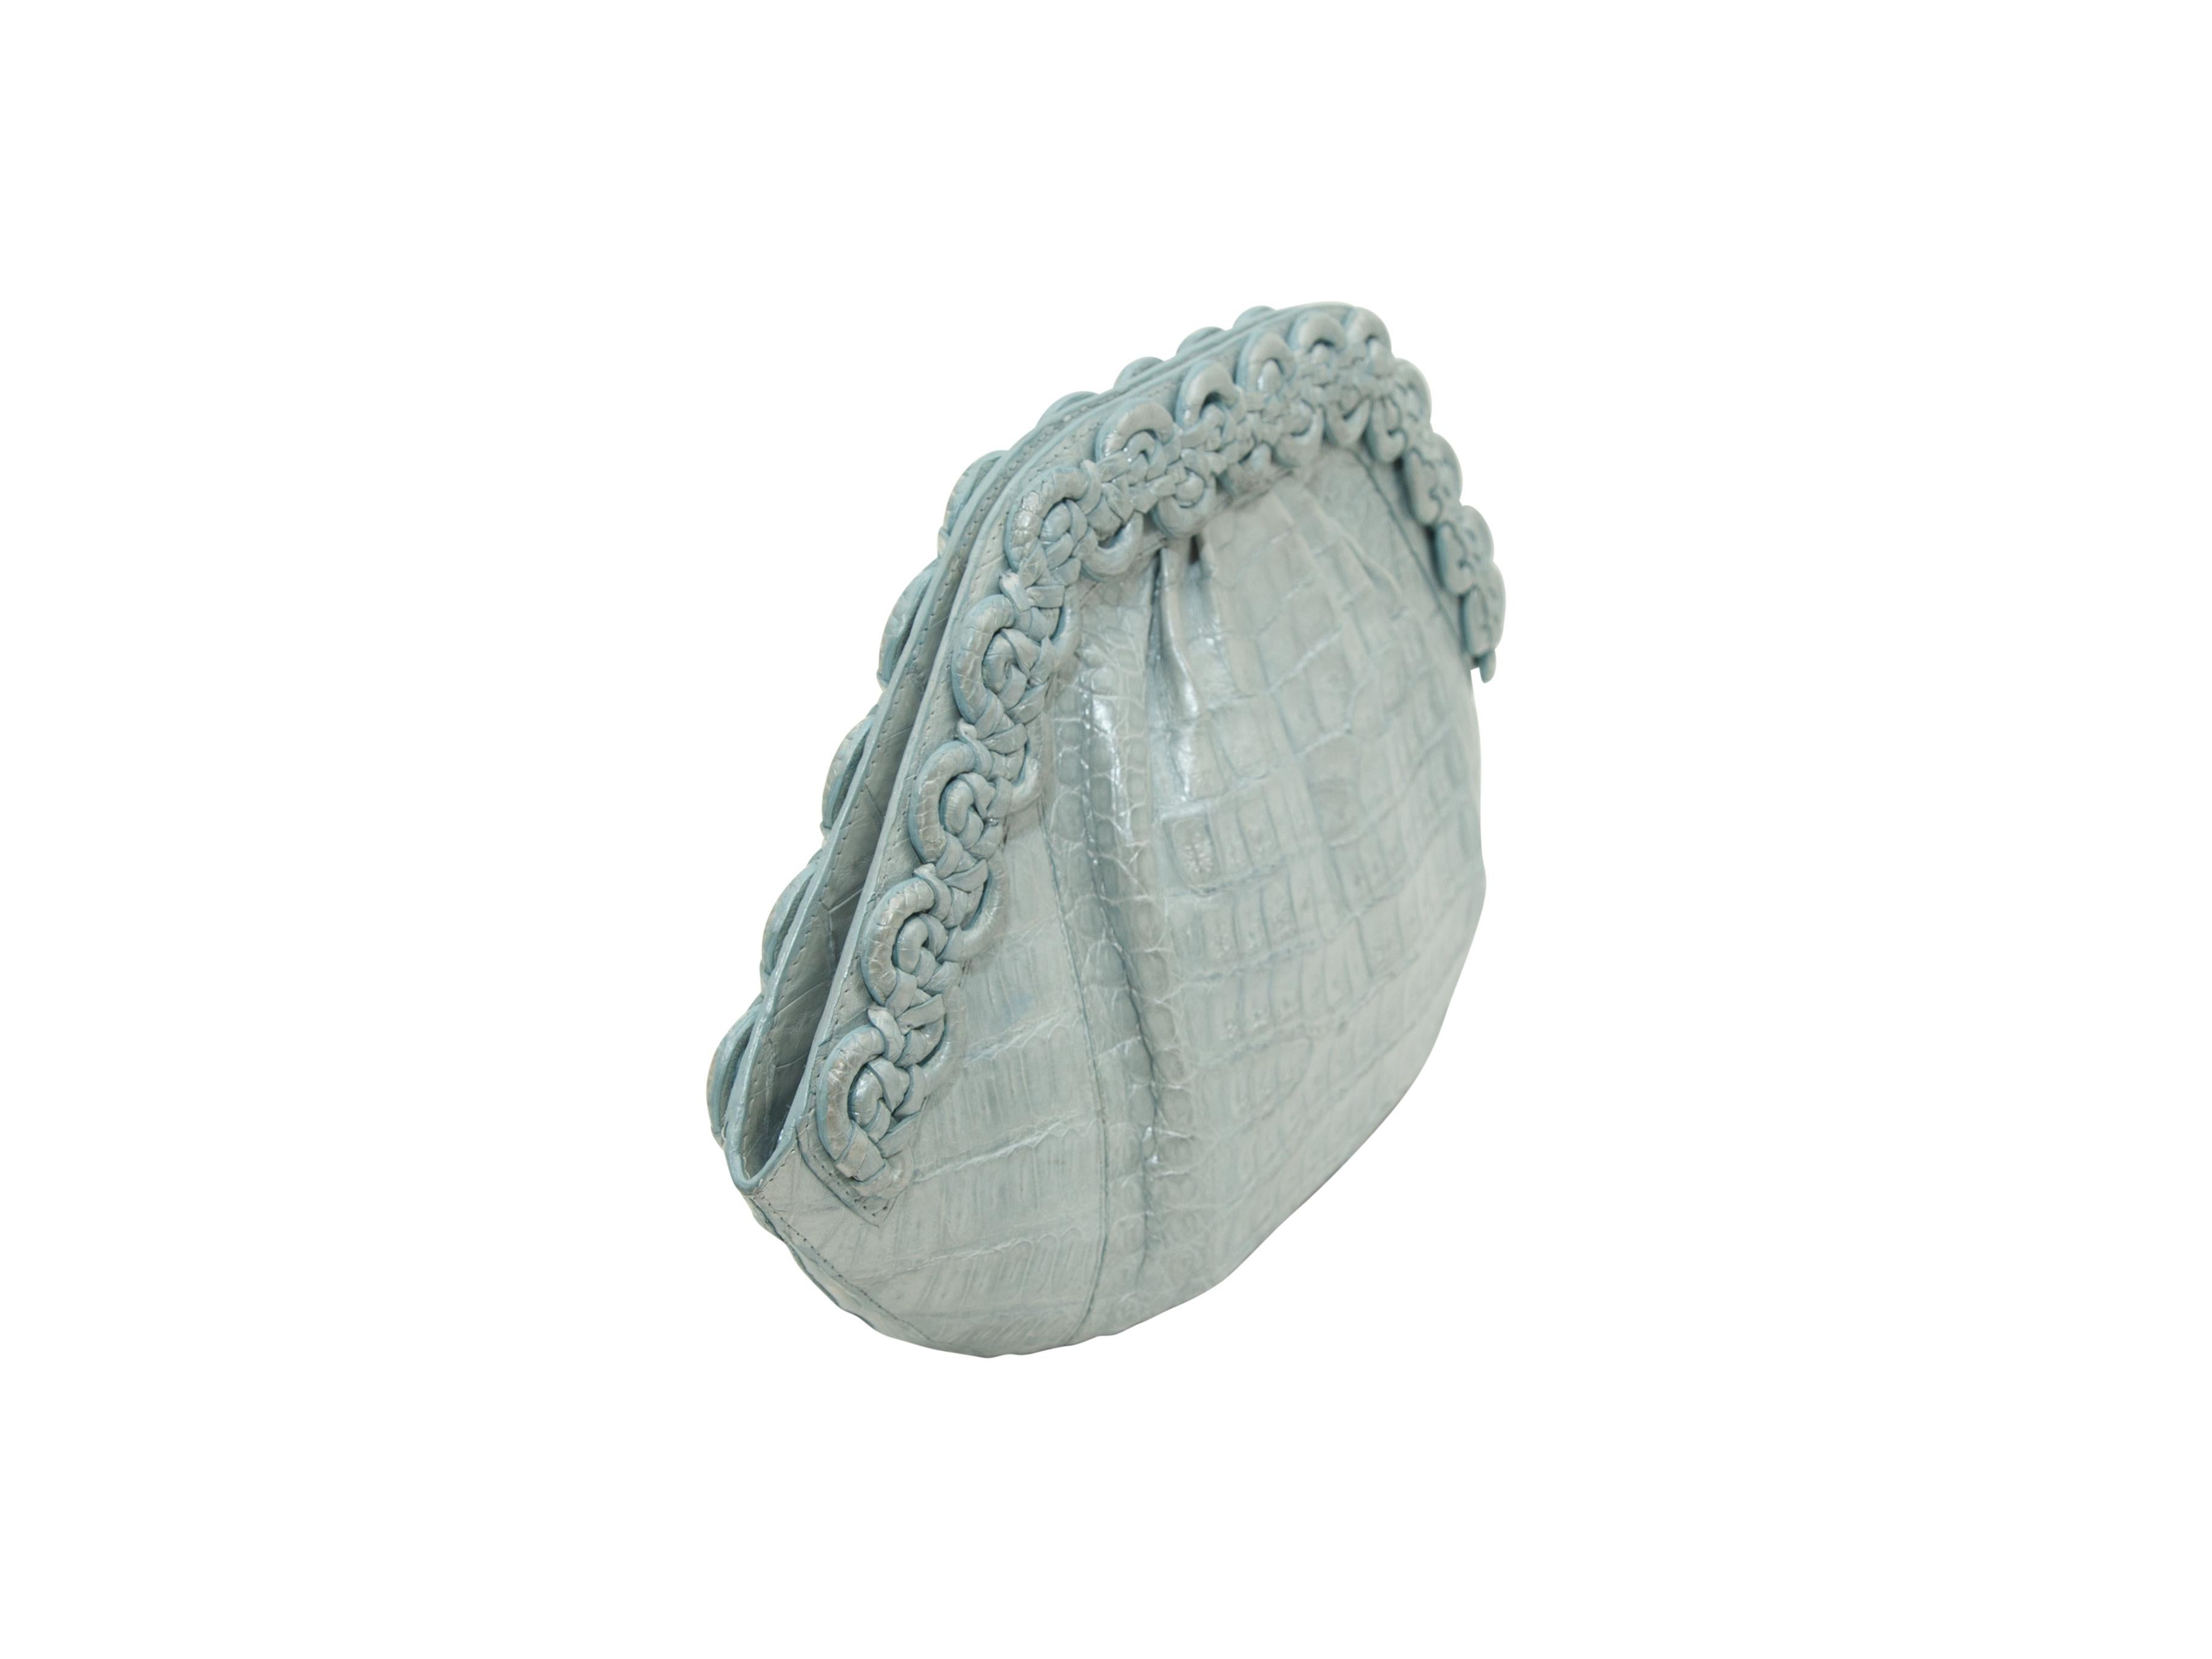 Product details:  Light Blue Nancy Gonzalez Crocodile Clutch.  The clam shell-shaped clutch has braided crocodile trim along the edges of the bag, and is lined in suede. The clutch has one zippered compartment, and an open compartment for your